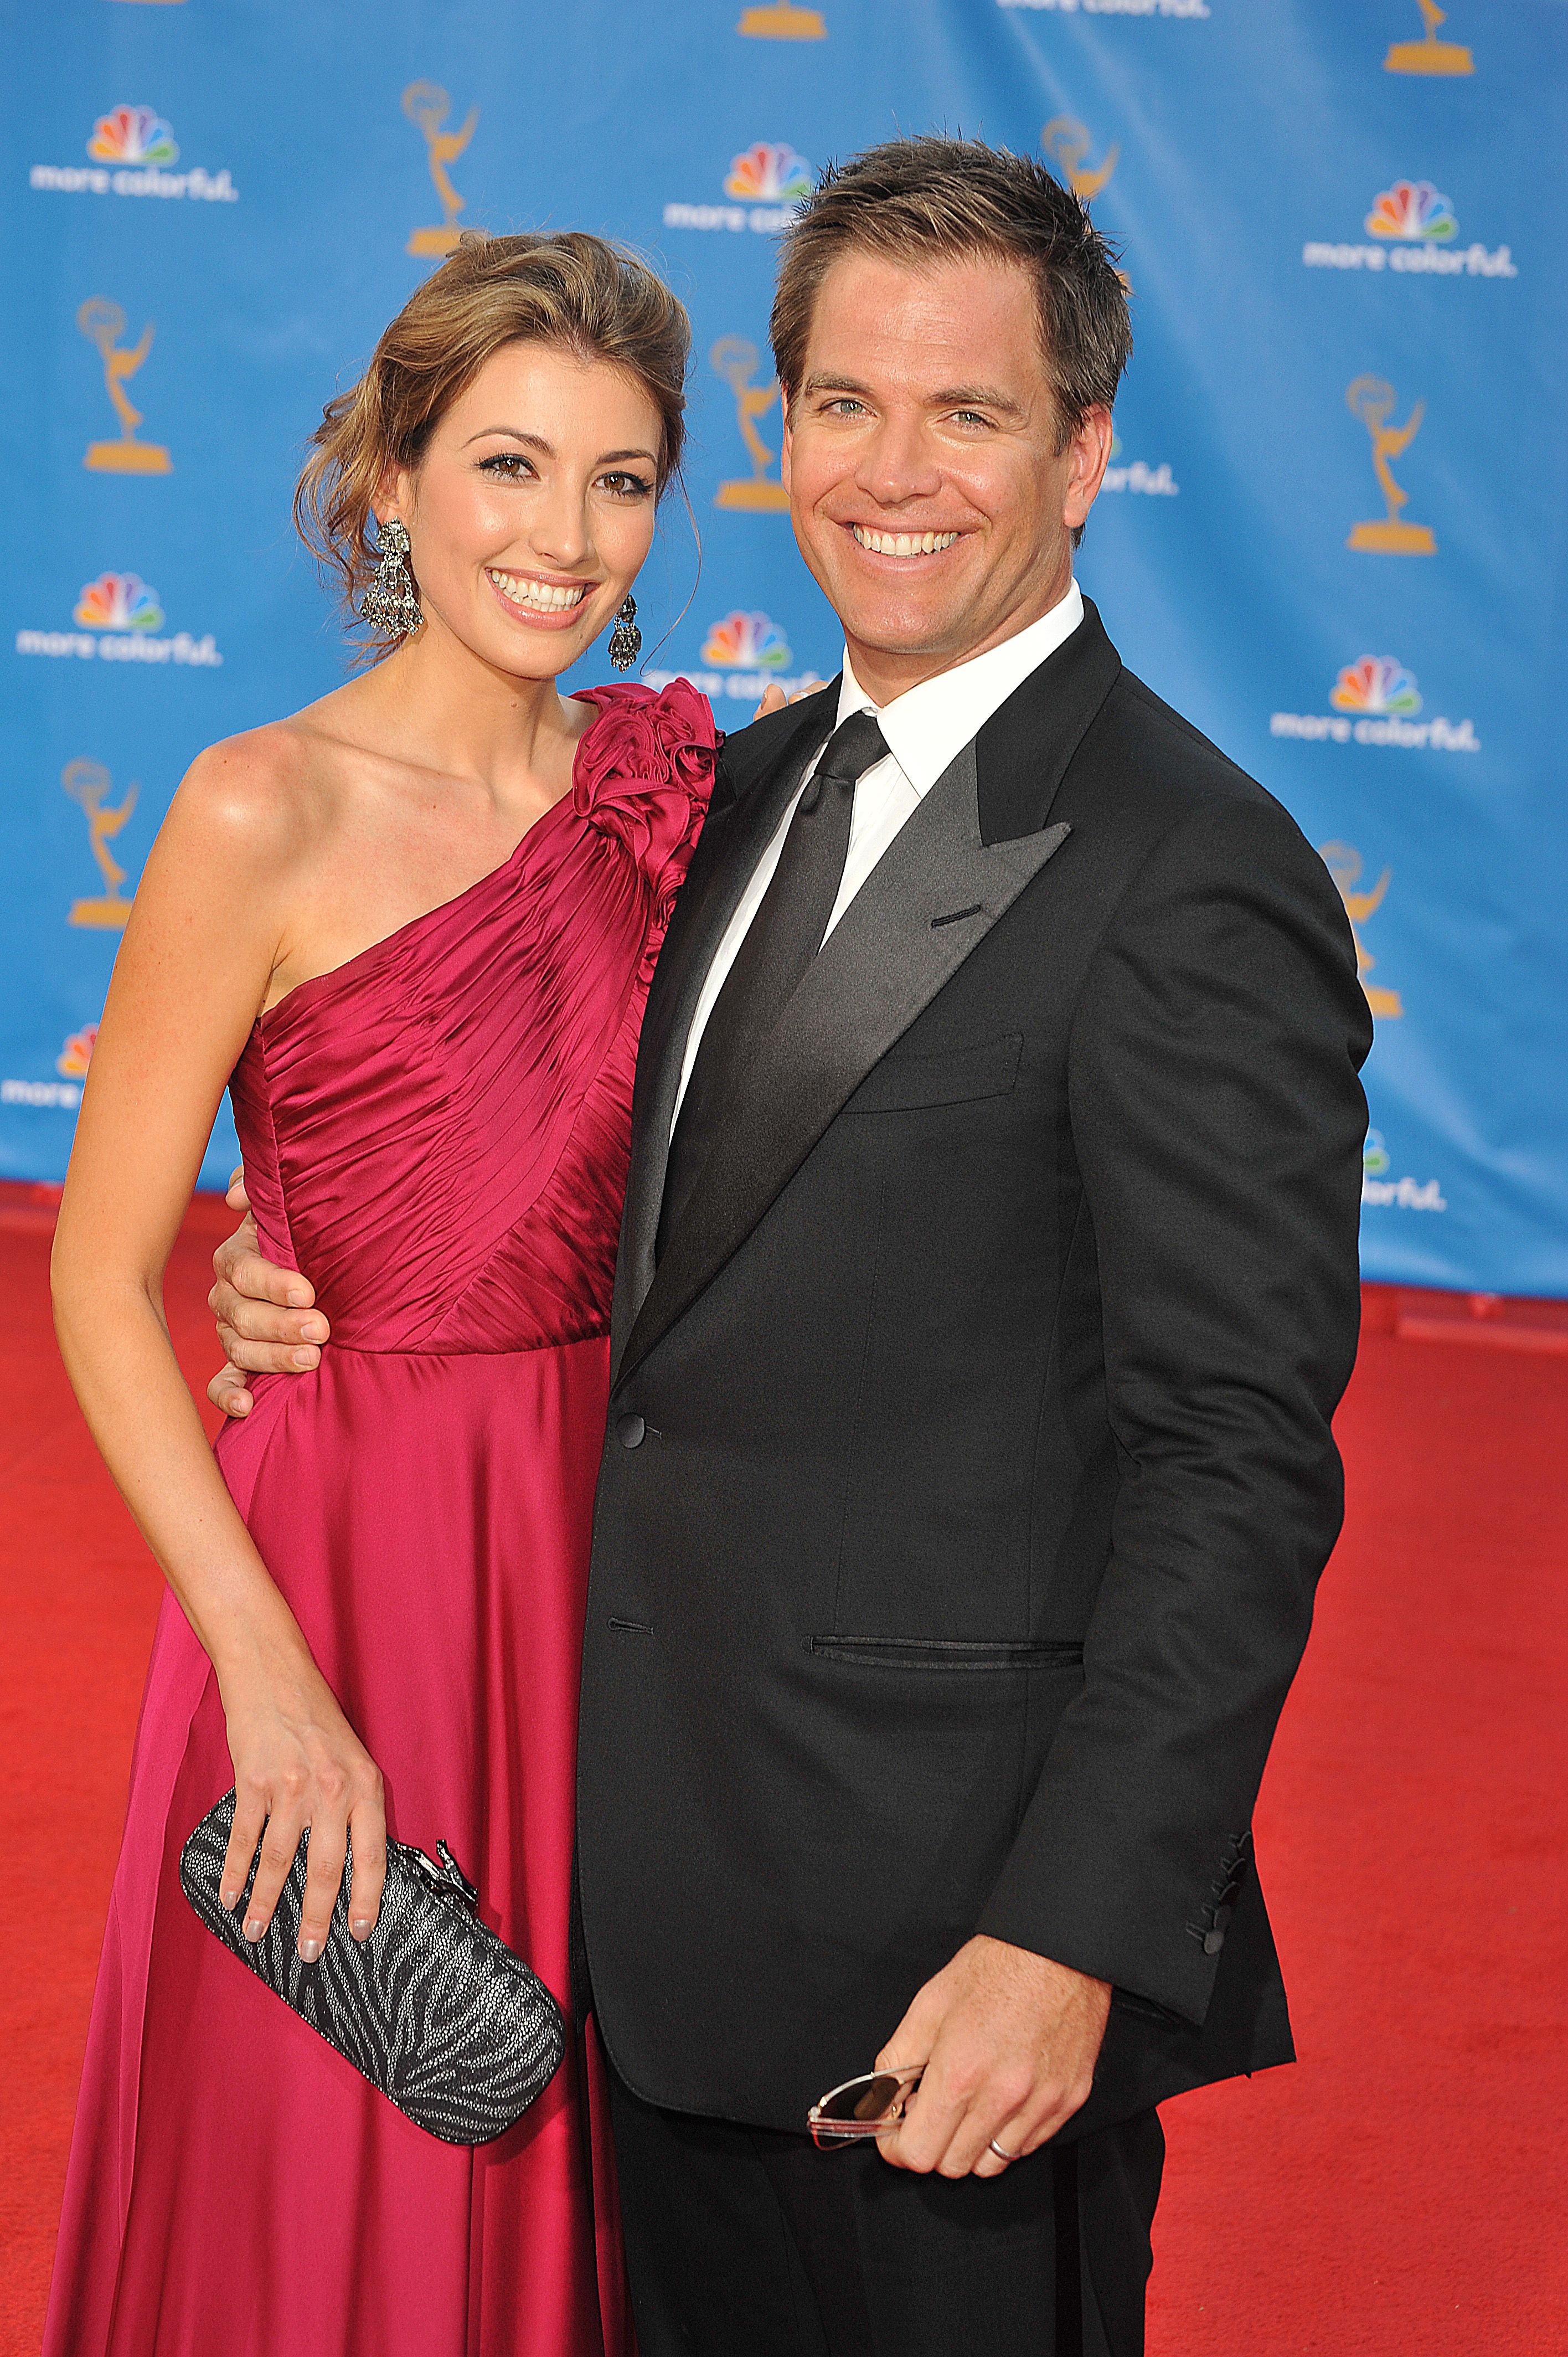 Bojana Janković and Michael Weatherly at the 62nd Annual Primetime Emmy Awards in Los Angeles on August 29, 2010. | Source: Frank Trapper/Corbis/Getty Images